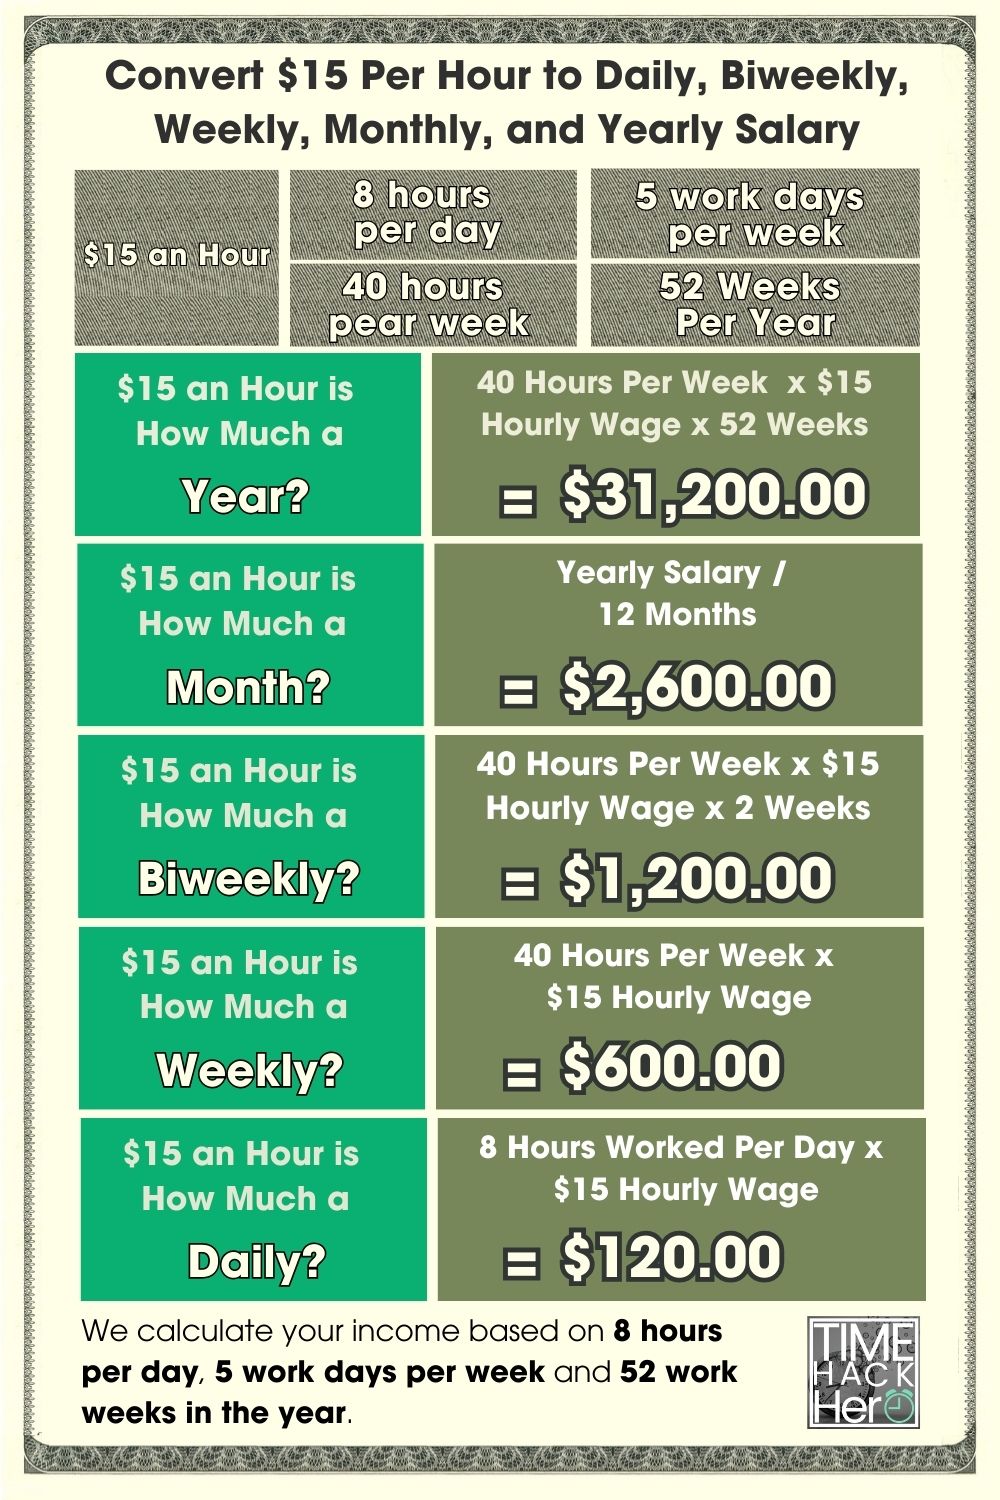 Convert $15 Per Hour to Daily, Biweekly, Weekly, Monthly, and Yearly Salary